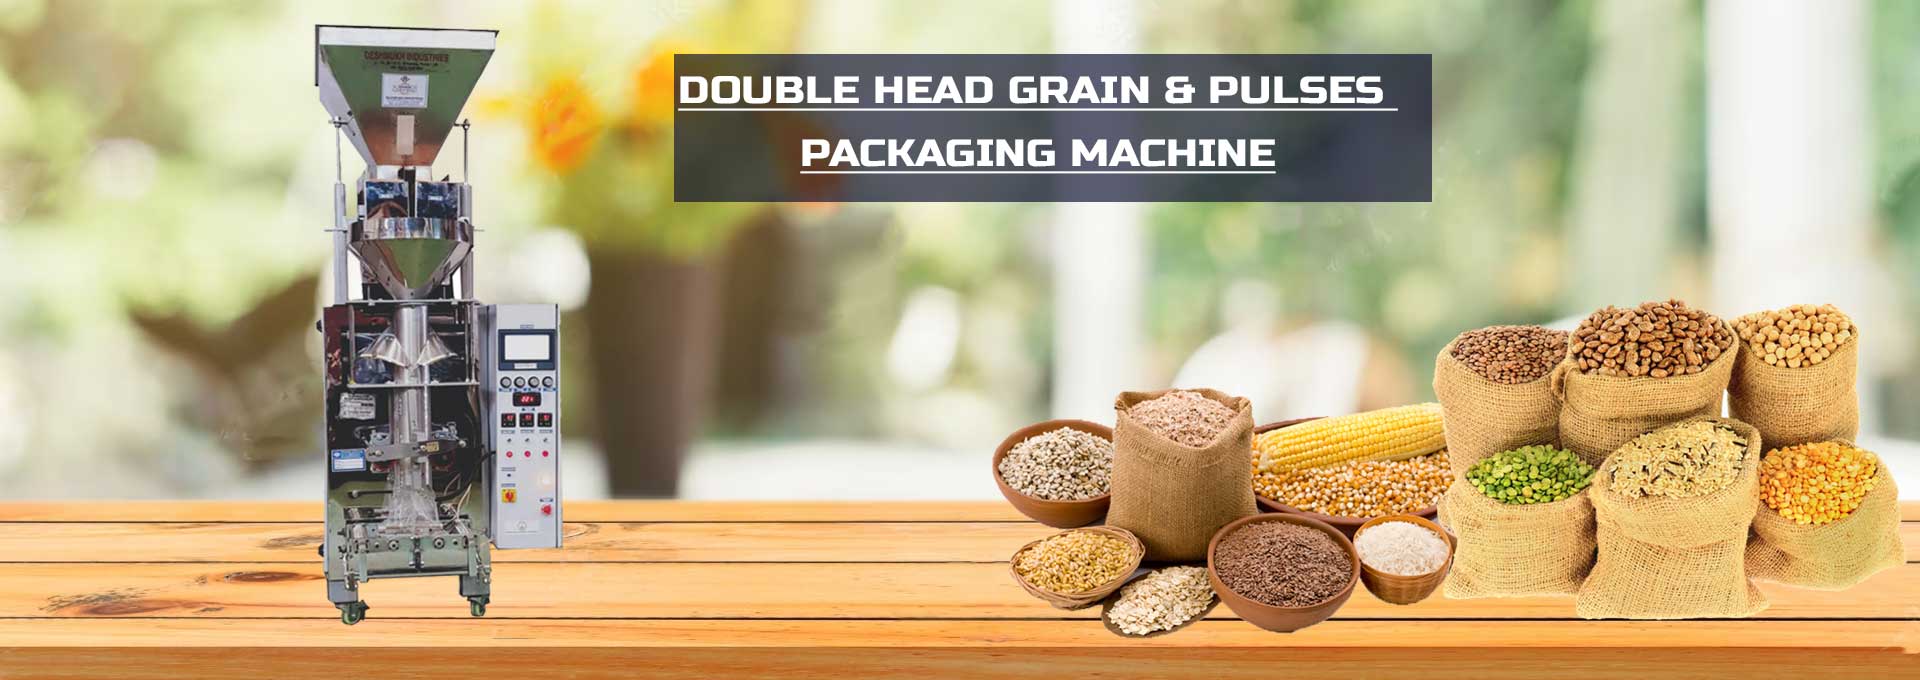 Double Head Grains & Pulses Packaging Machines